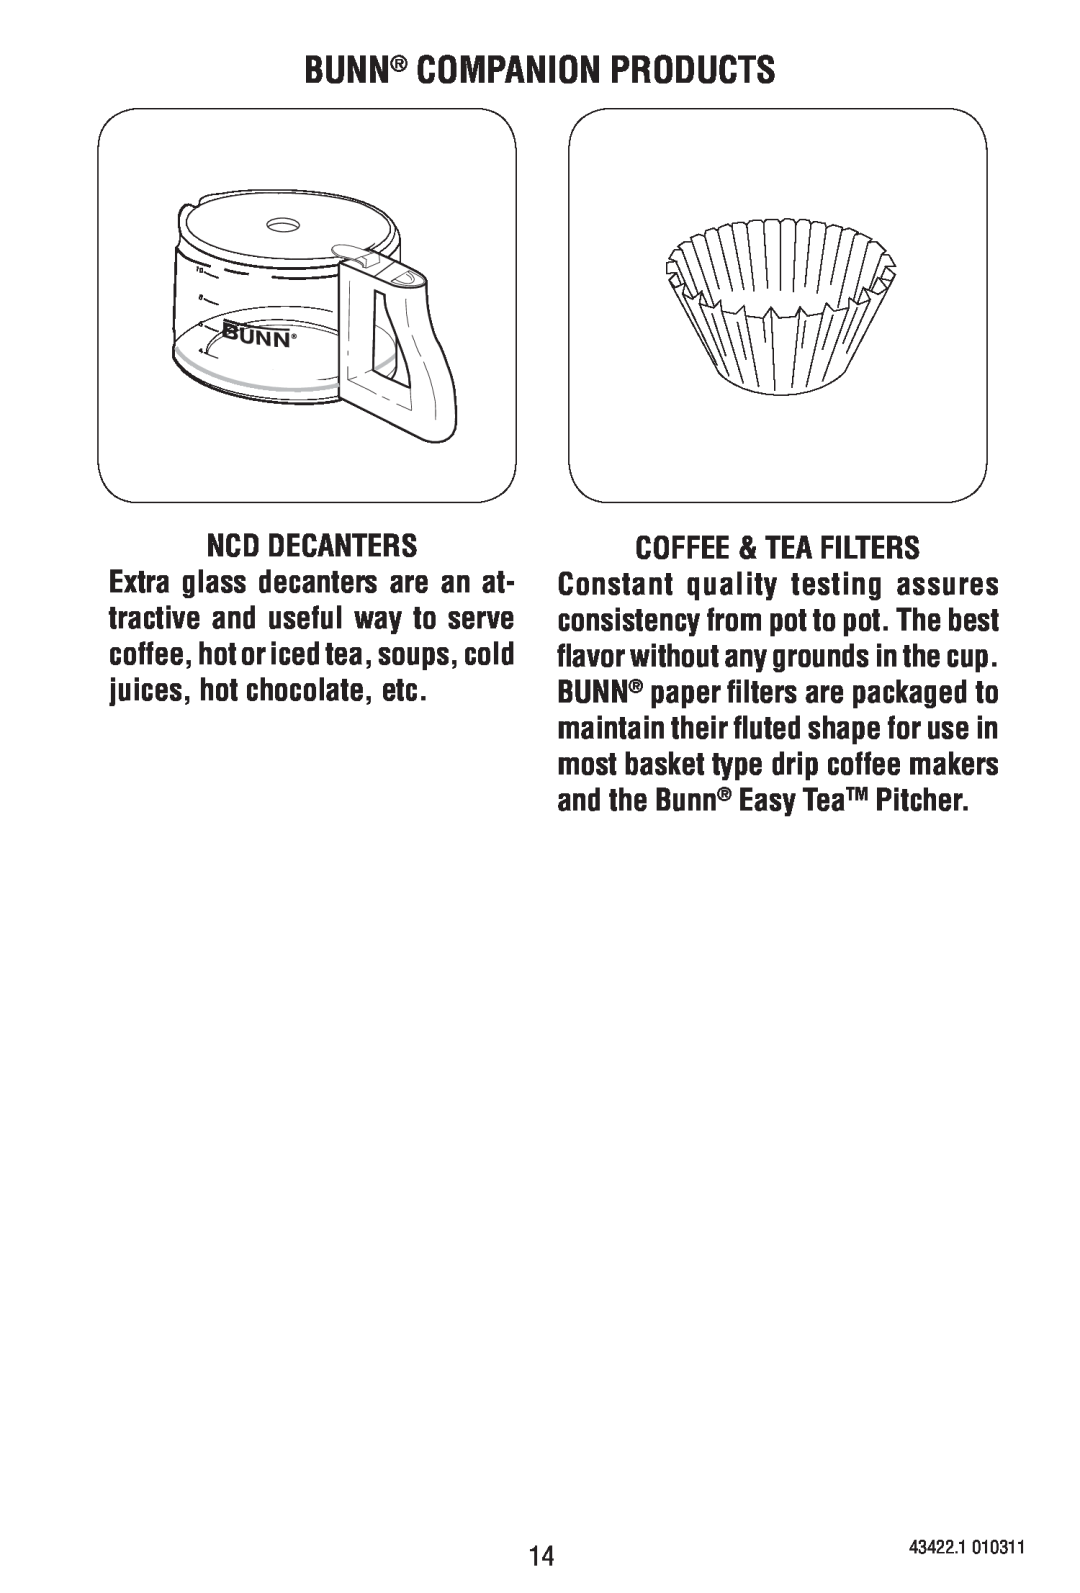 Bunn A10 specifications Bunn Companion Products, Ncd Decanters, Coffee & Tea Filters, Auxiliary Warmers 